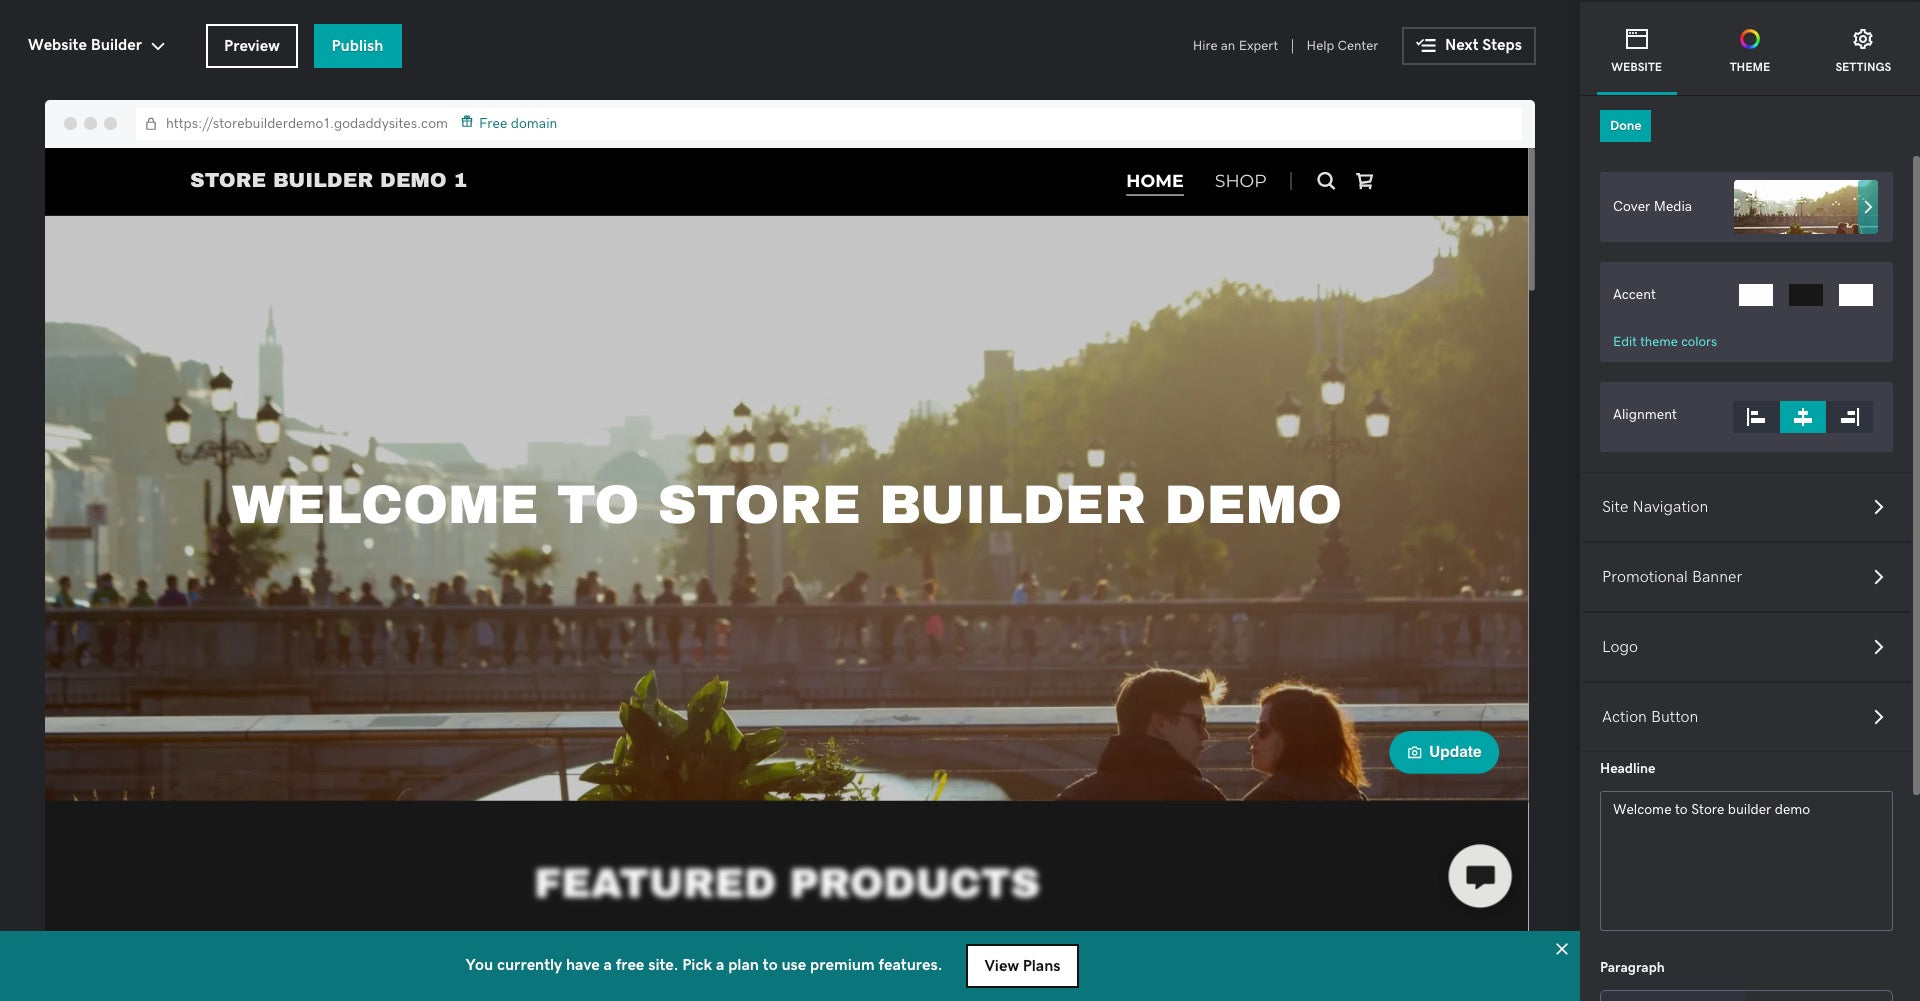 A preview screen of the GoDaddy store builder demo